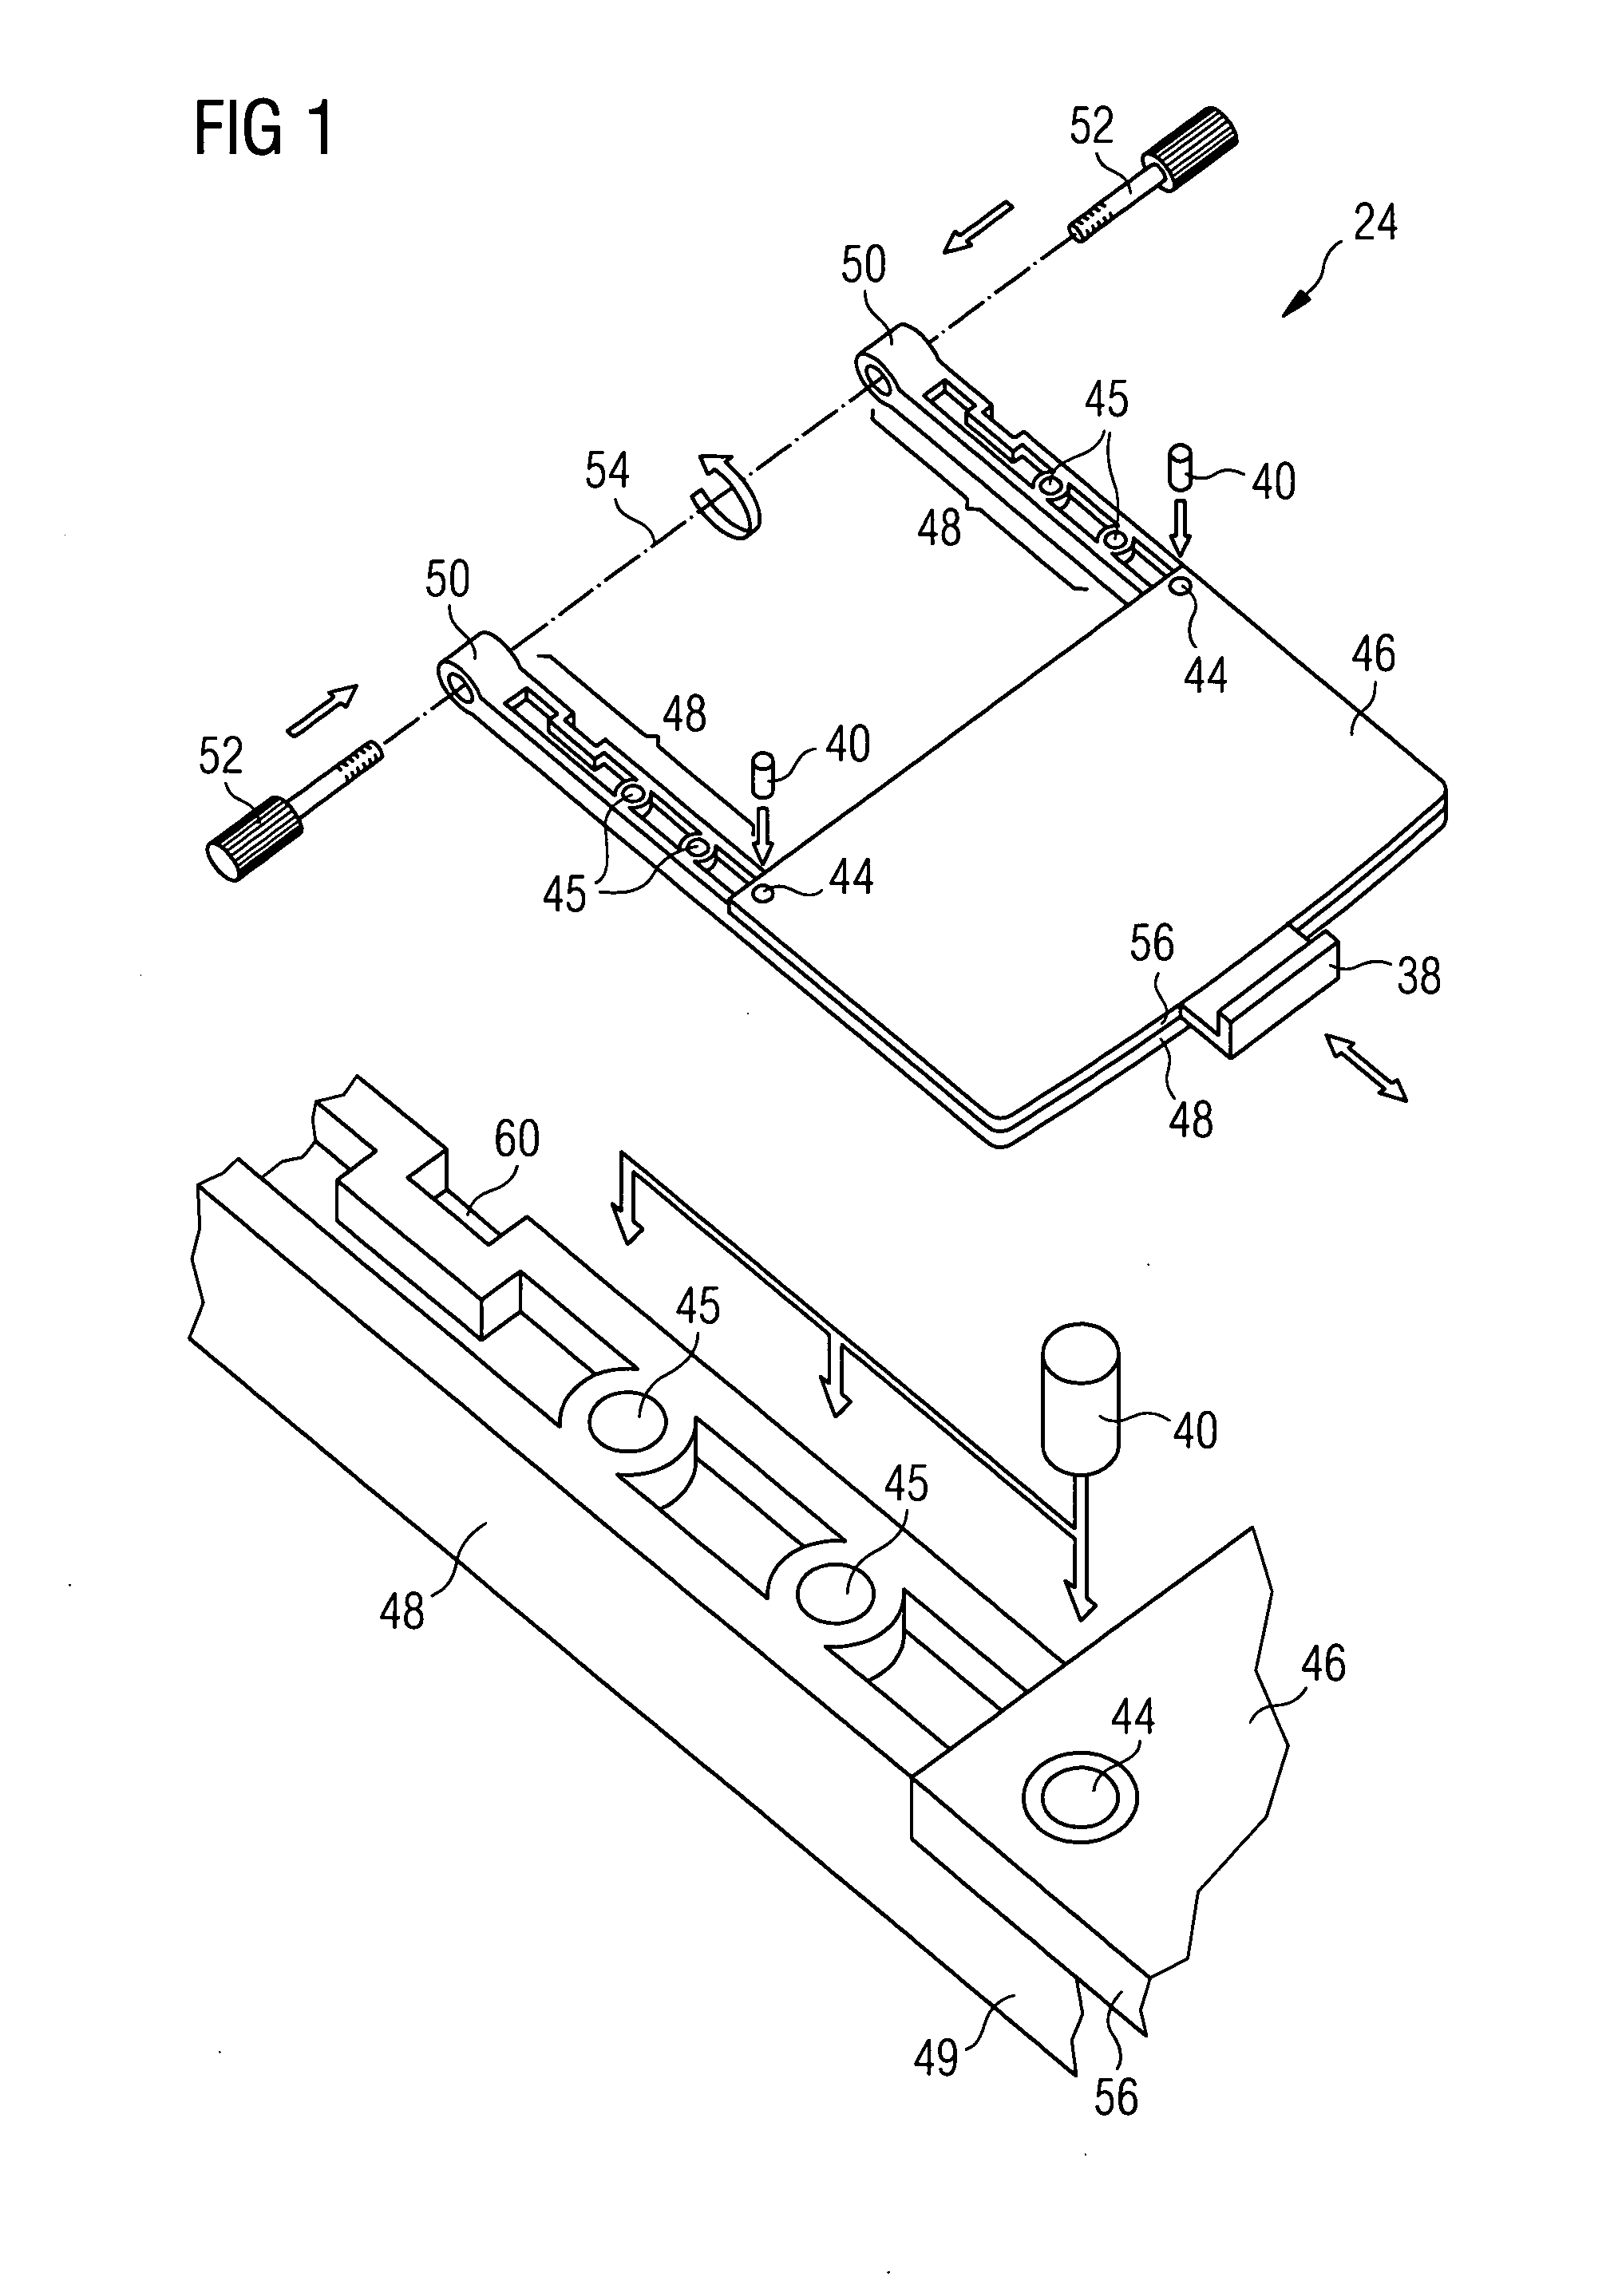 Splicer with Splicing Cassette Carrier